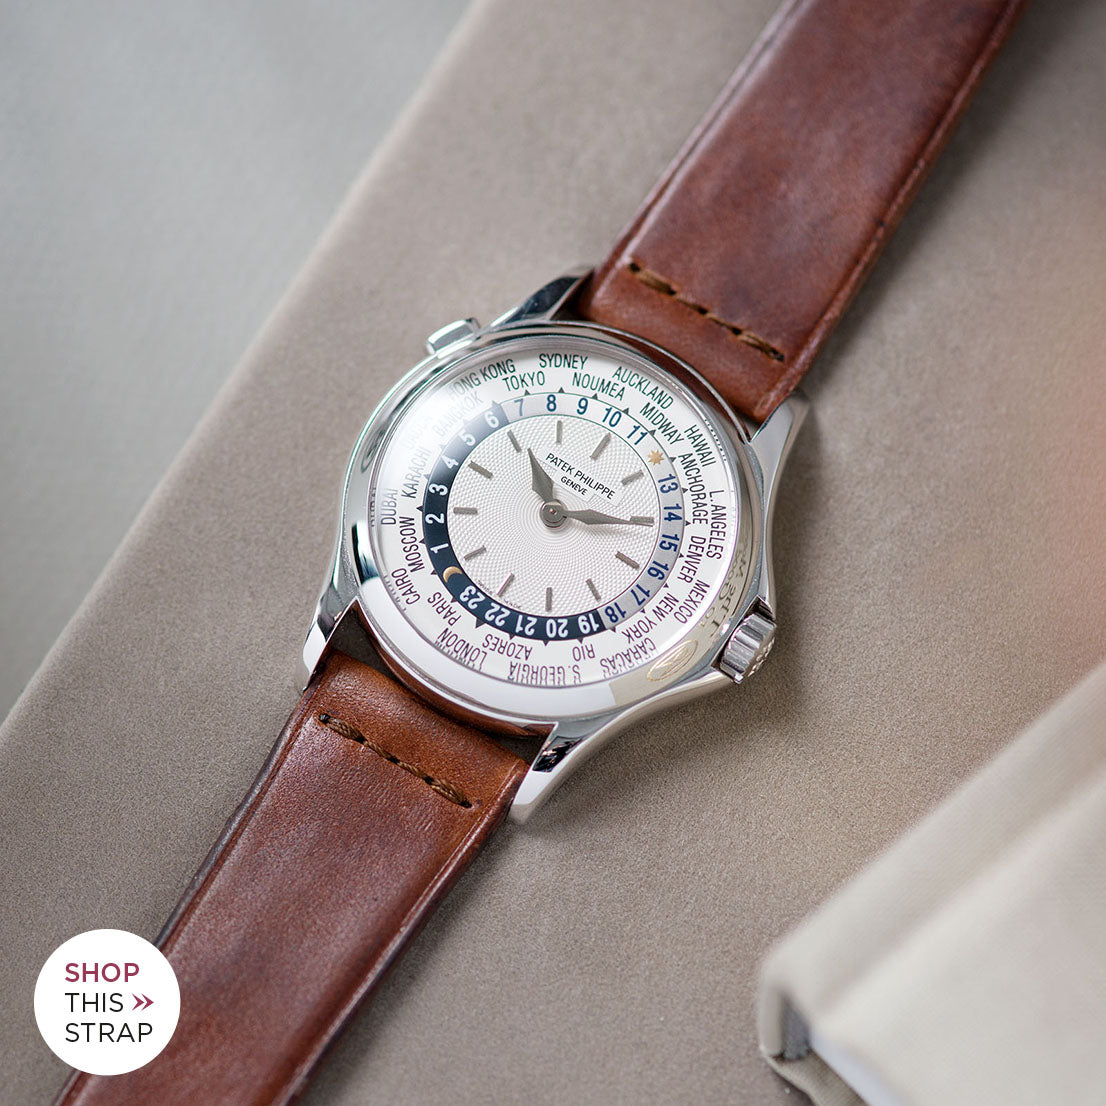 Bulang and Sons_Strap Guide _Patek Philippe 5110G White Gold World Time_Siena Brown Extra Thin Leather Watch Strap